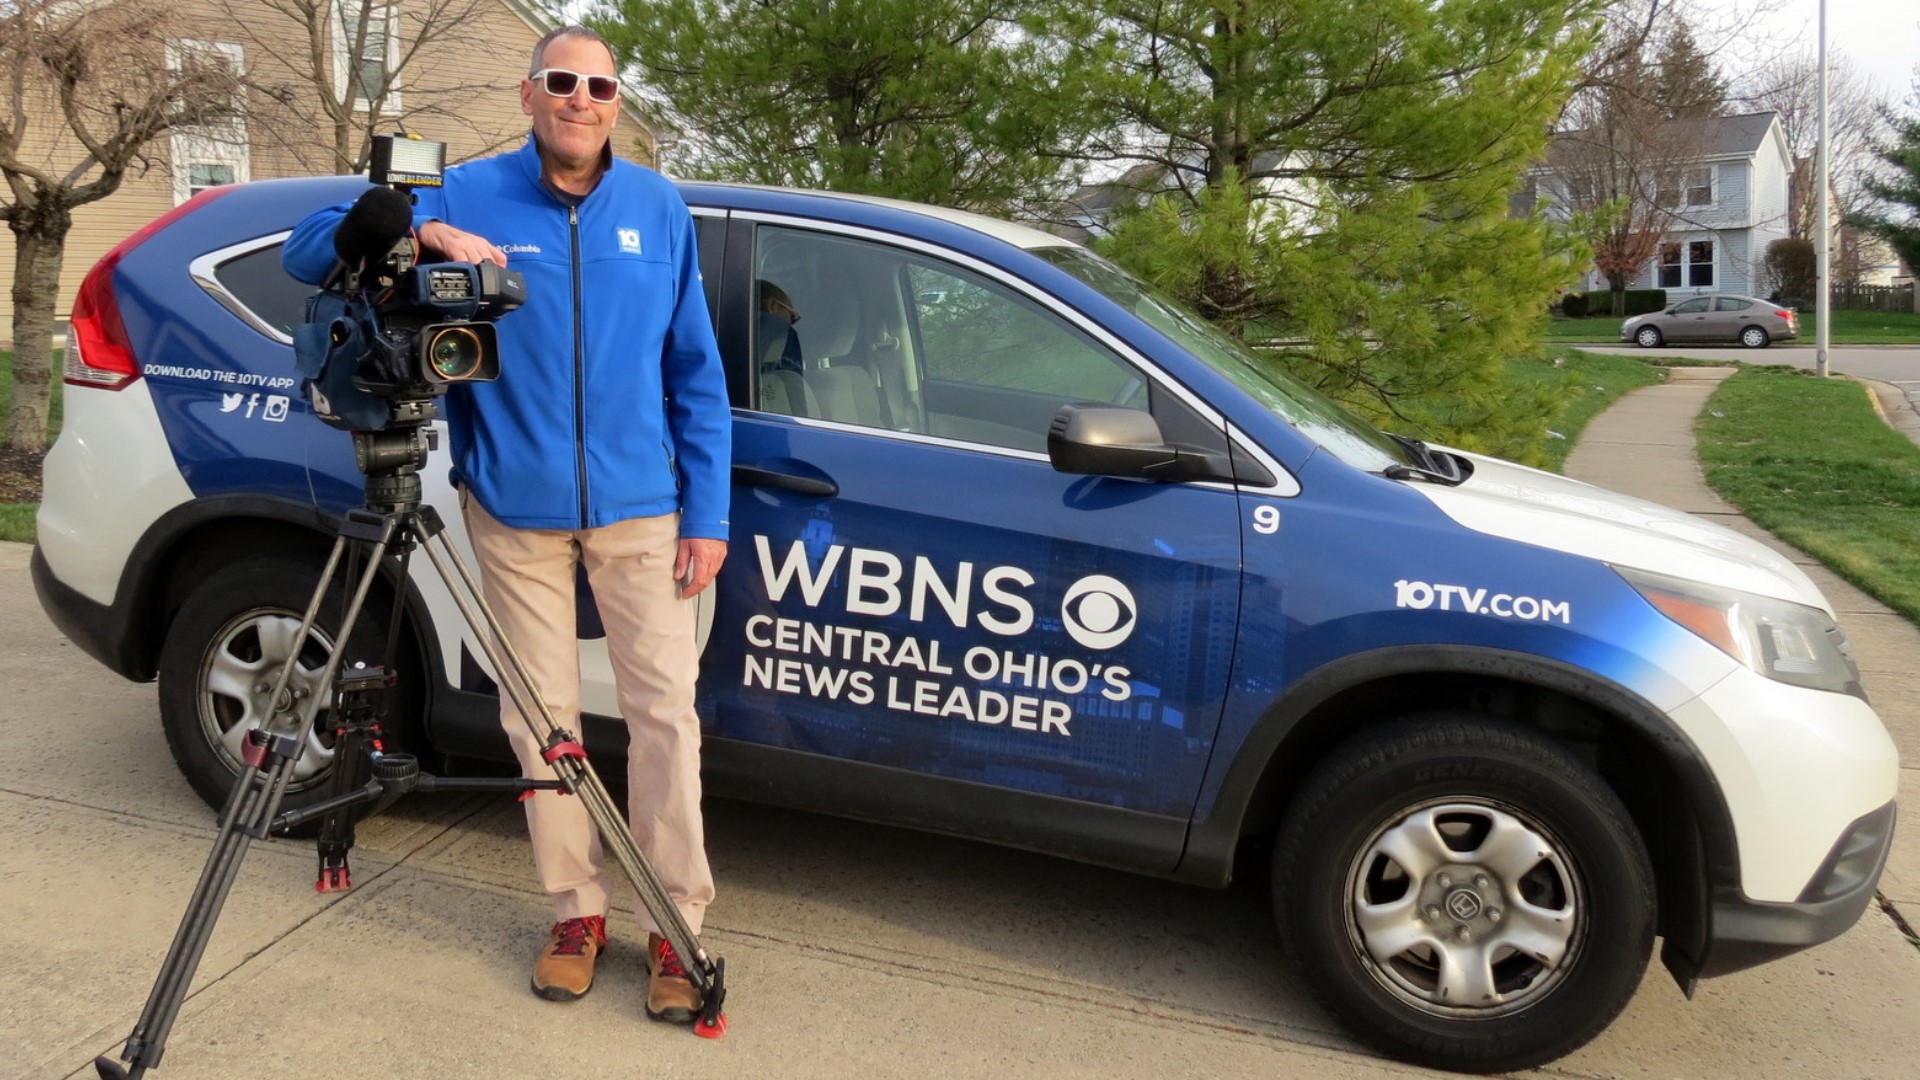 In his time with WBNS, Jeff has traveled the world and covered some of the biggest stories through his camera.